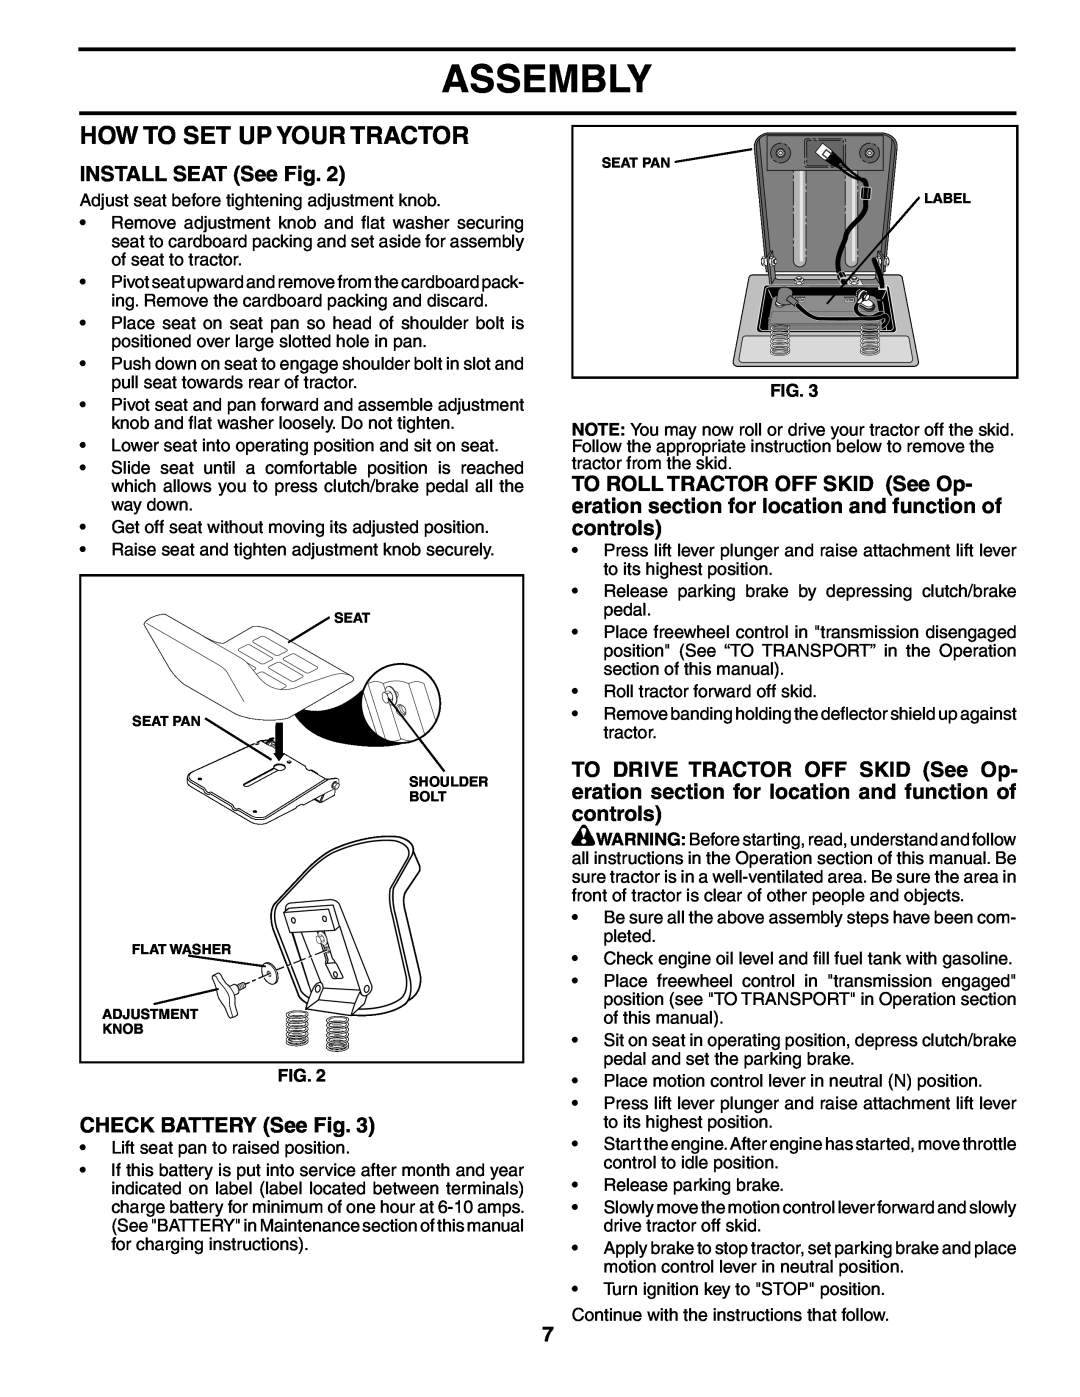 Poulan 184617 owner manual How To Set Up Your Tractor, INSTALL SEAT See Fig, CHECK BATTERY See Fig, Assembly 